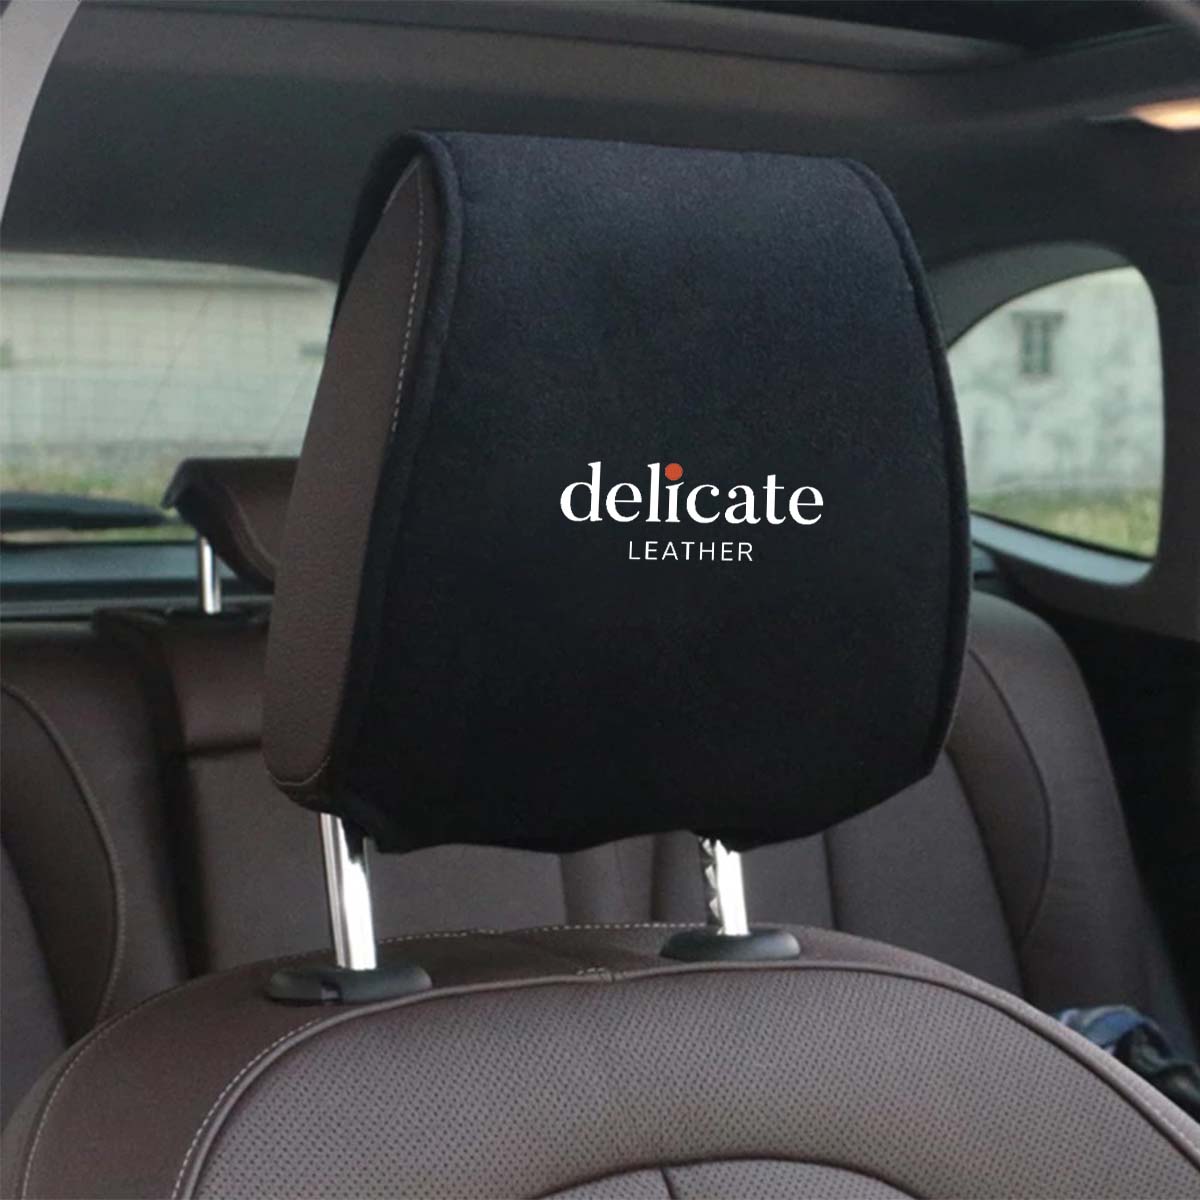 Subaru Car Seat Headrest Cover: Stylish Protection for Your Vehicle's Headrests